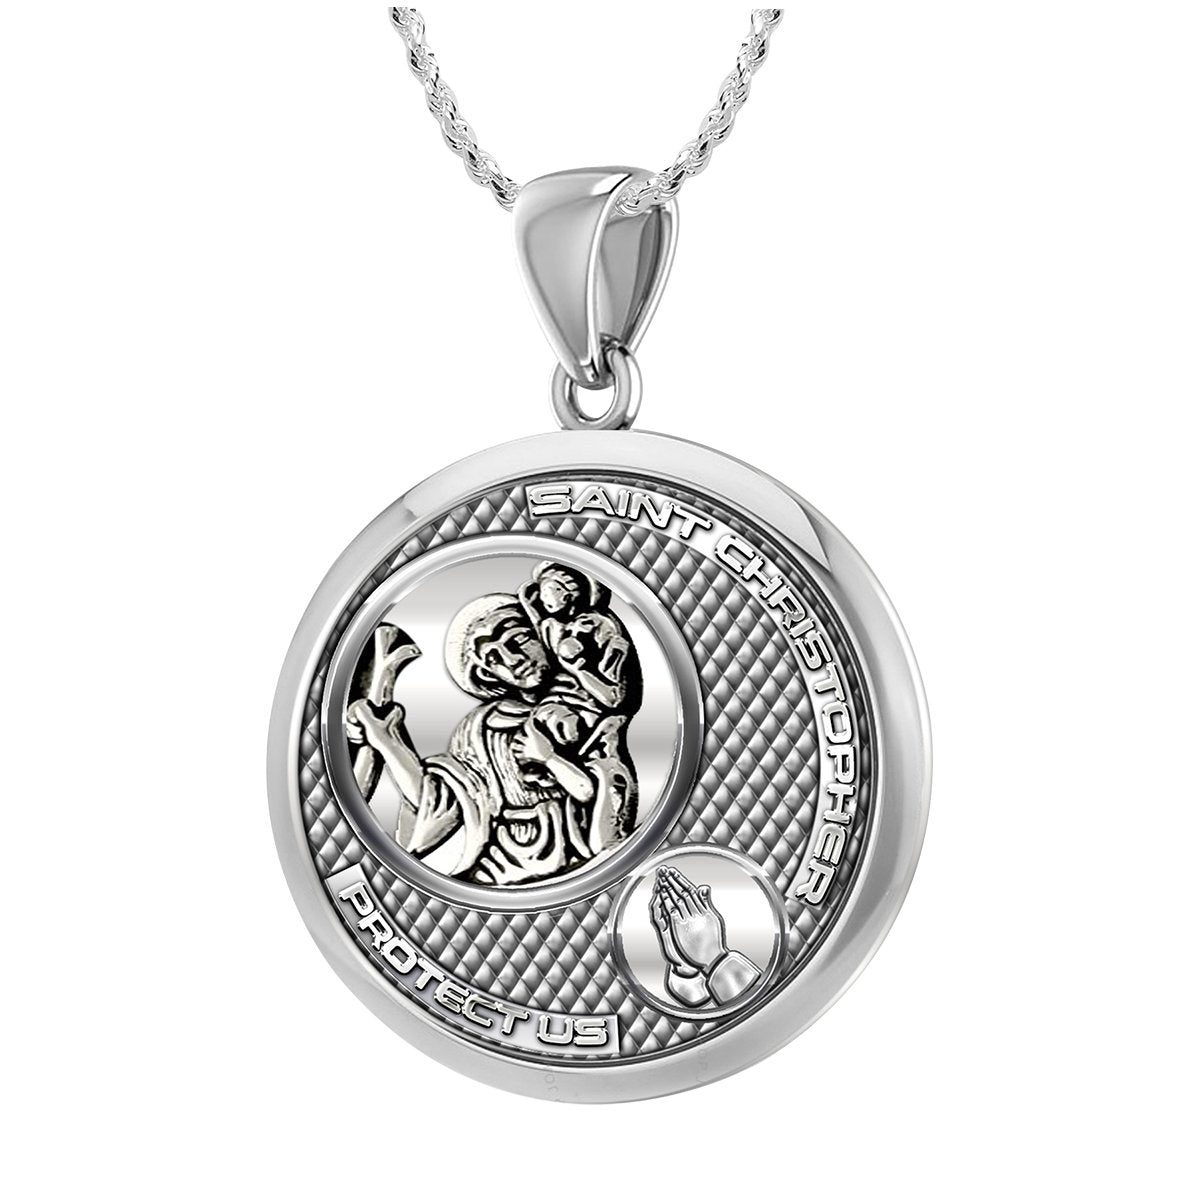 Ladies 925 Sterling Silver Round Saint Christopher Round Polished Finish Pendant Necklace, 25mm - US Jewels